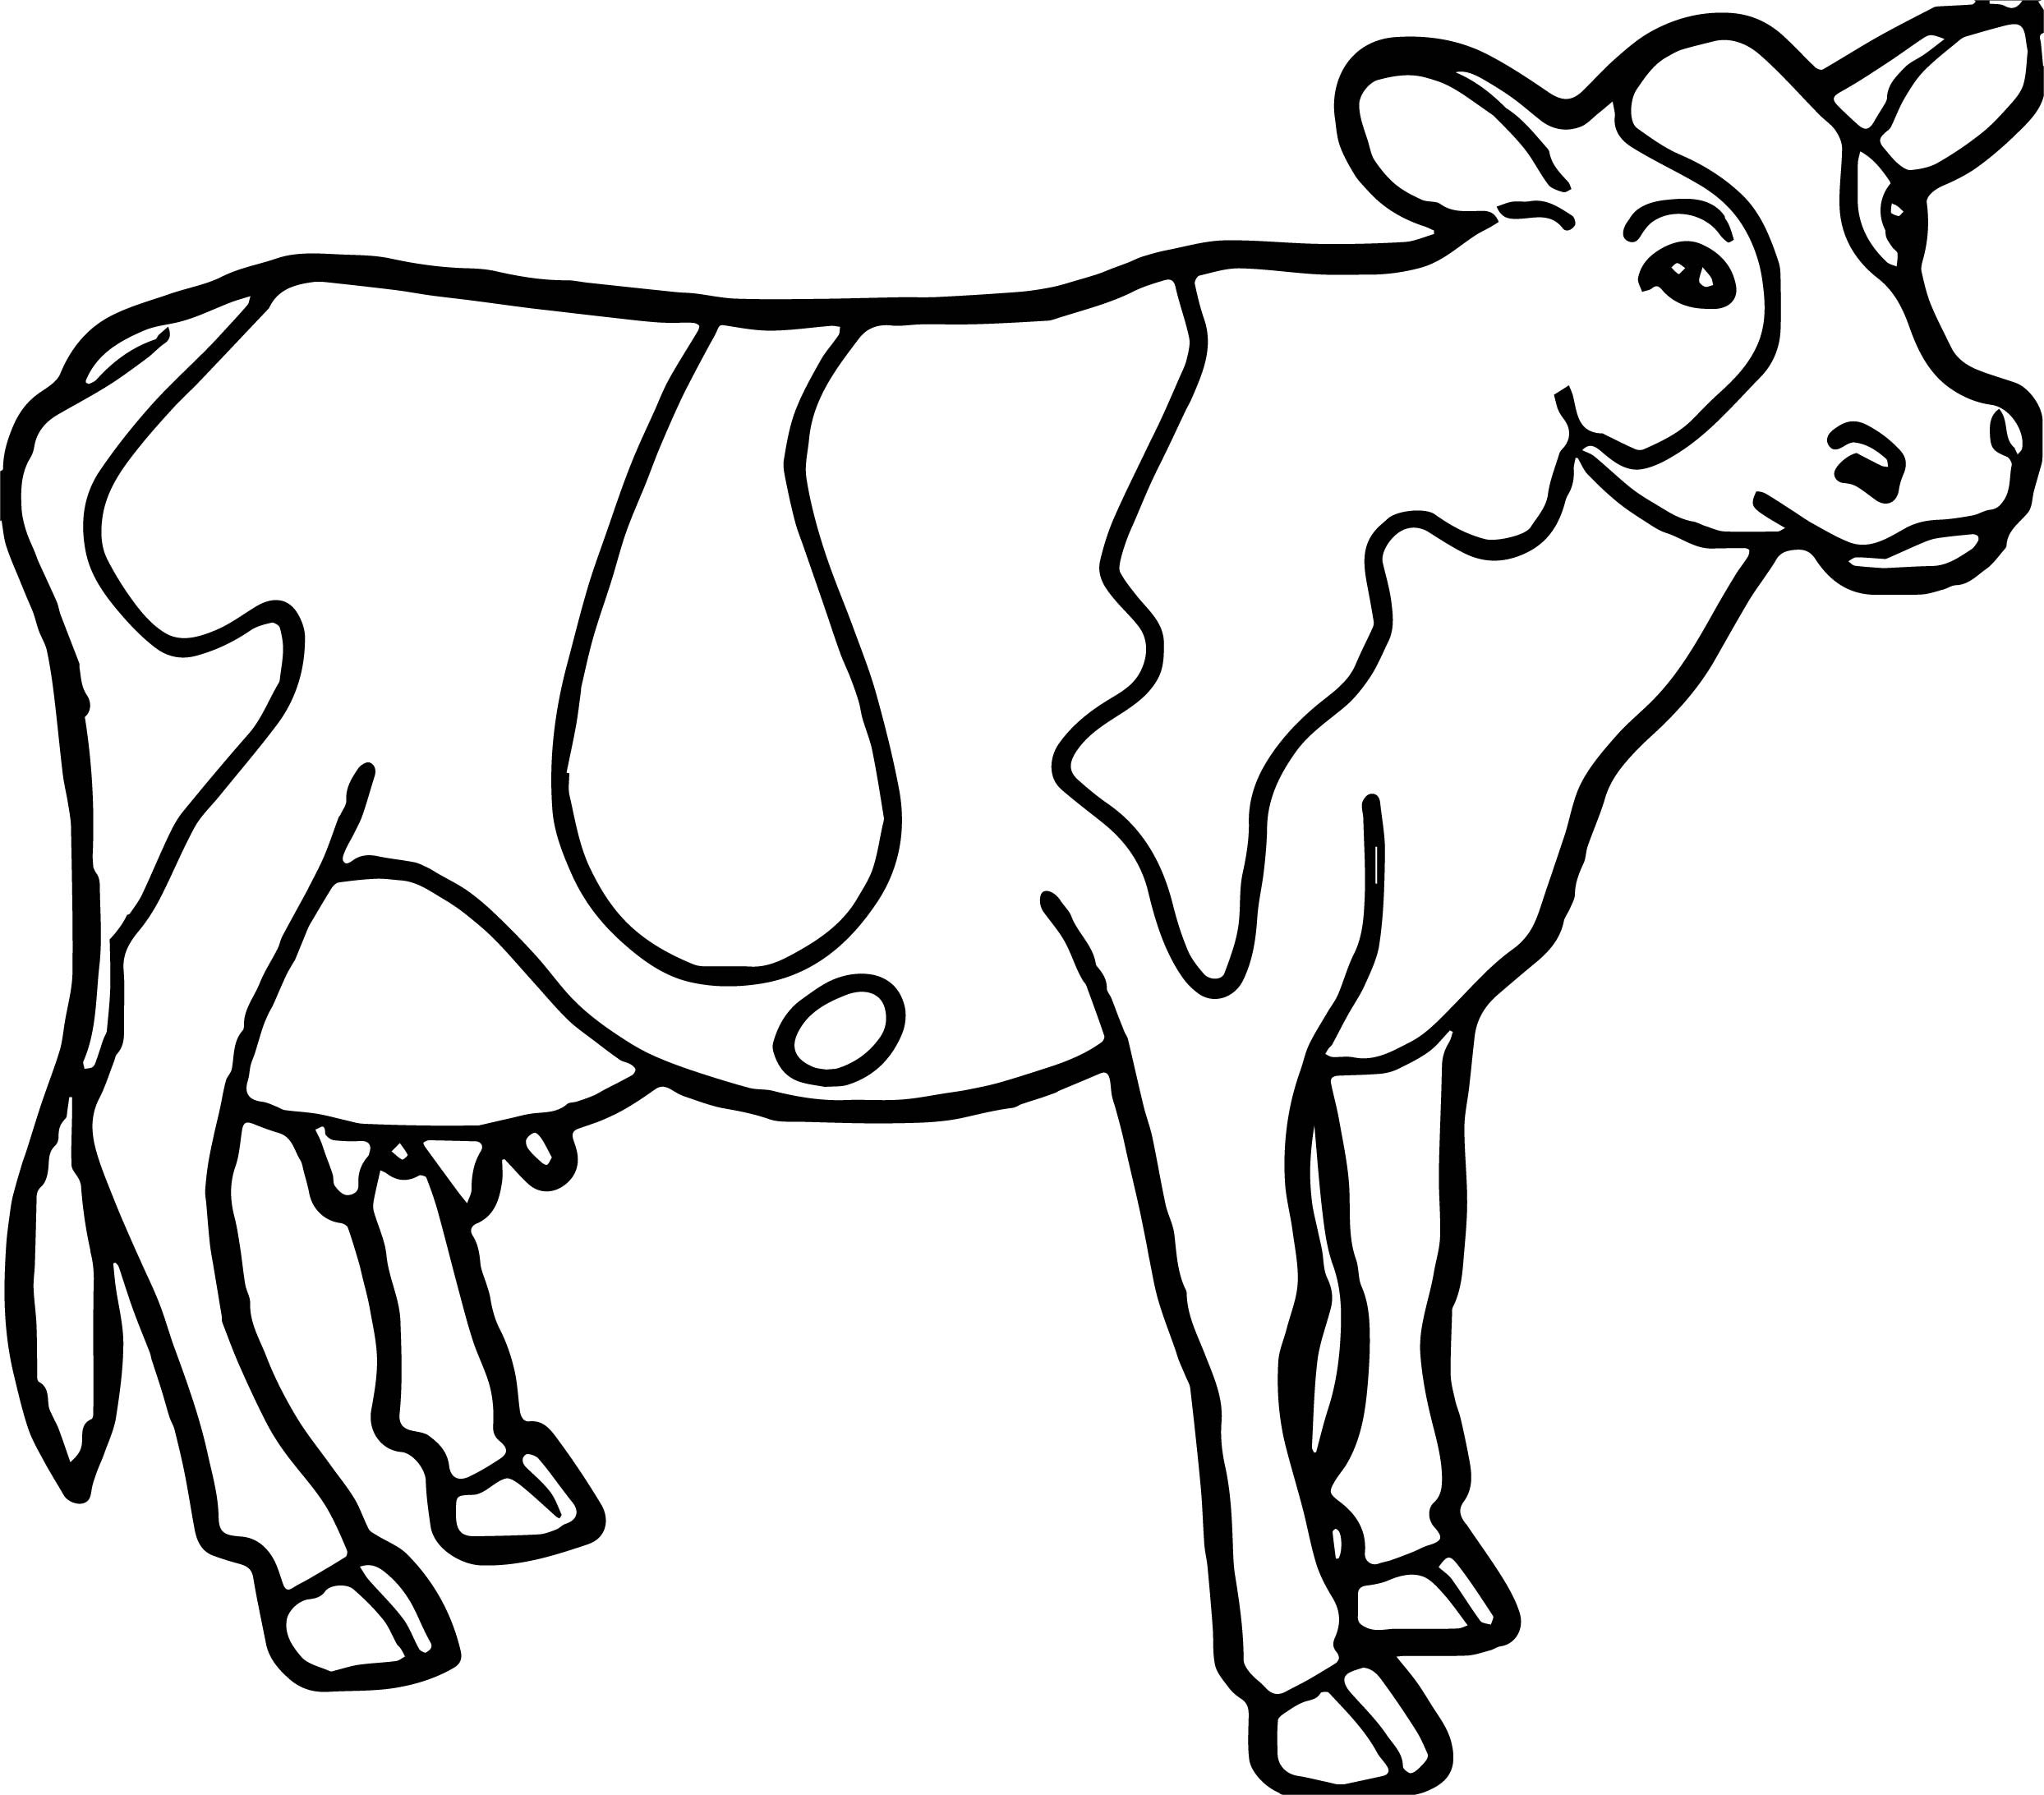 Cow Face Coloring Pages at Free